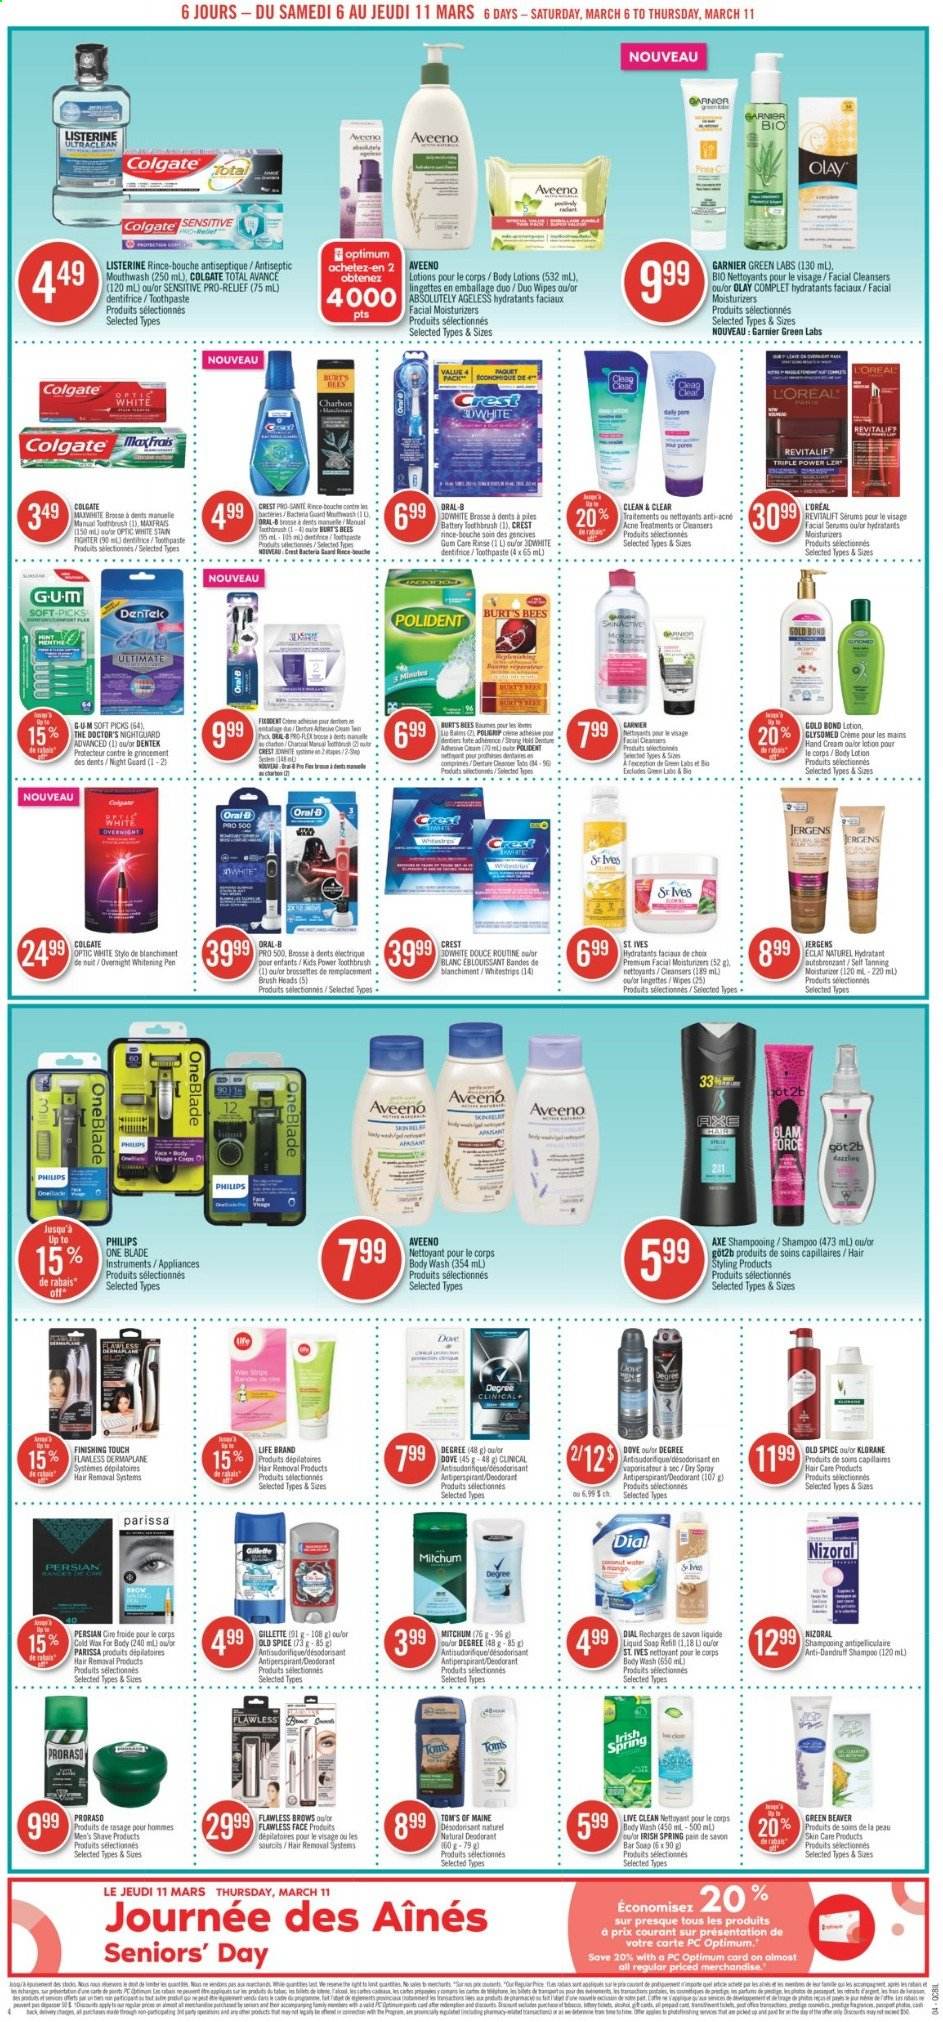 thumbnail - Pharmaprix Flyer - March 06, 2021 - March 11, 2021 - Sales products - Mars, spice, wipes, Aveeno, body wash, soap bar, Dial, soap, toothbrush, toothpaste, mouthwash, Polident, Crest, L’Oréal, moisturizer, Olay, Clean & Clear, Klorane, body lotion, hand cream, Jergens, anti-perspirant, Eclat, hair removal, pen, iPhone, BOSE, Garnier, Gillette, Listerine, shampoo, Old Spice, Oral-B, deodorant. Page 4.